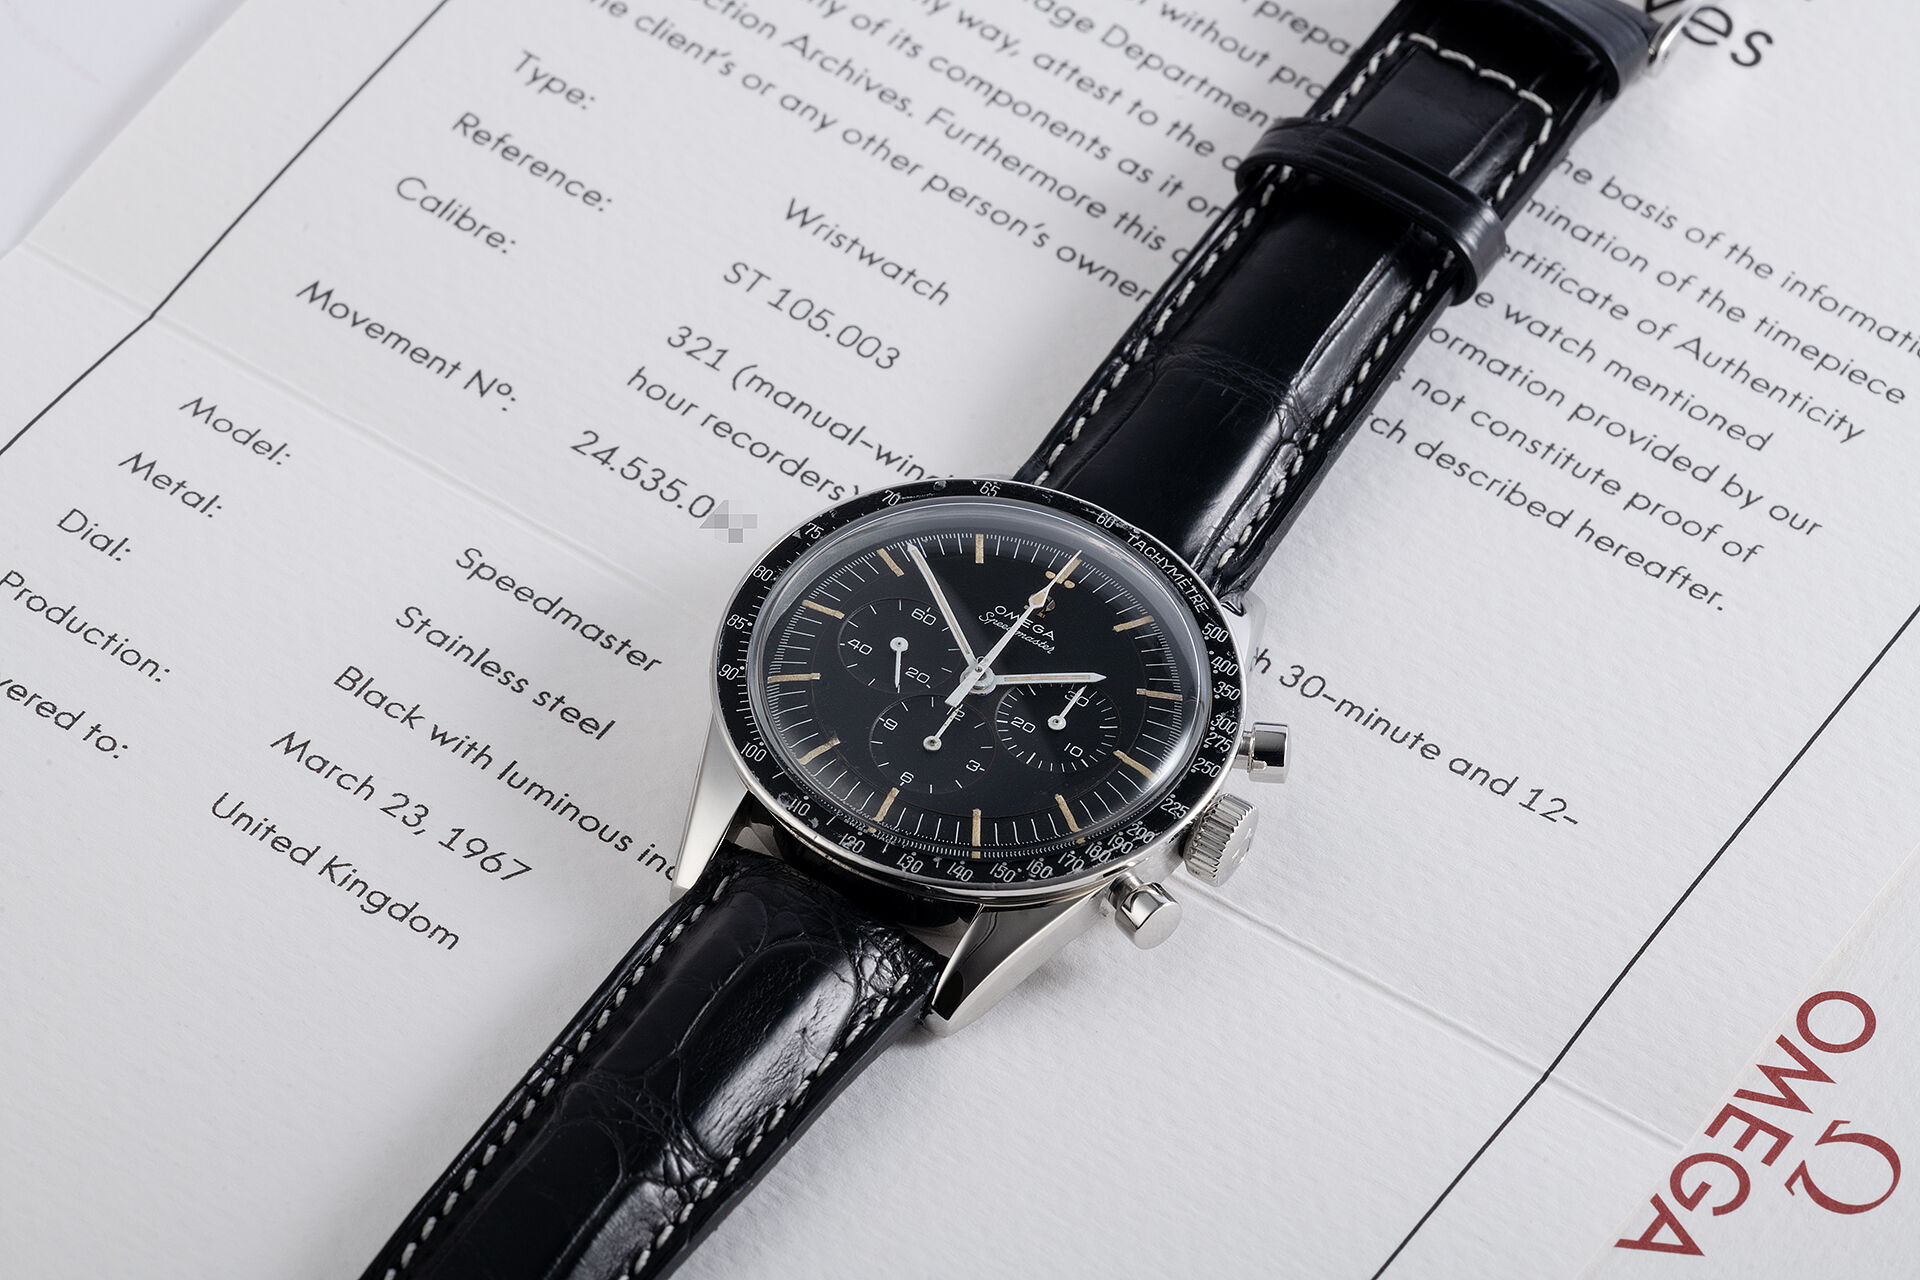 ref ST105.003-65 | 'Omega Extract from Archive' | Omega Speedmaster